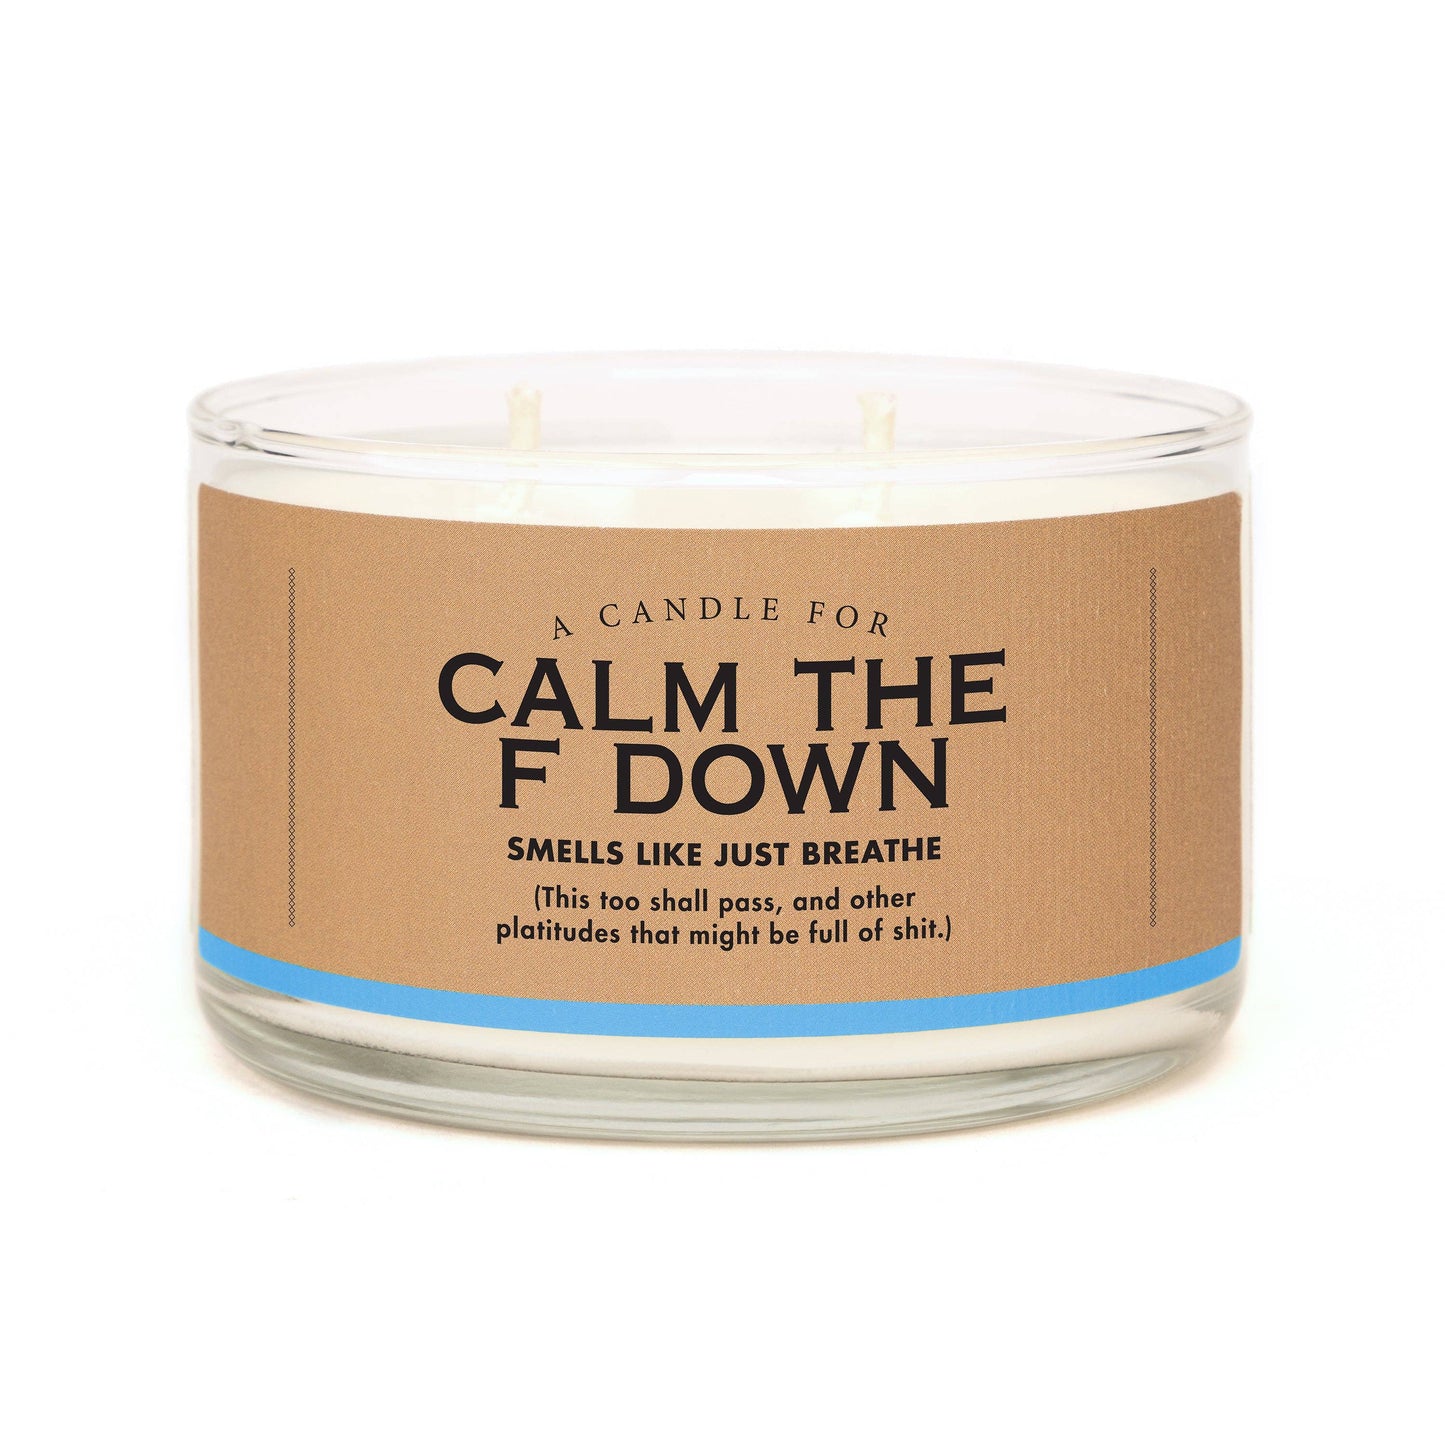 A Candle for Calm the F Down | Funny Candle